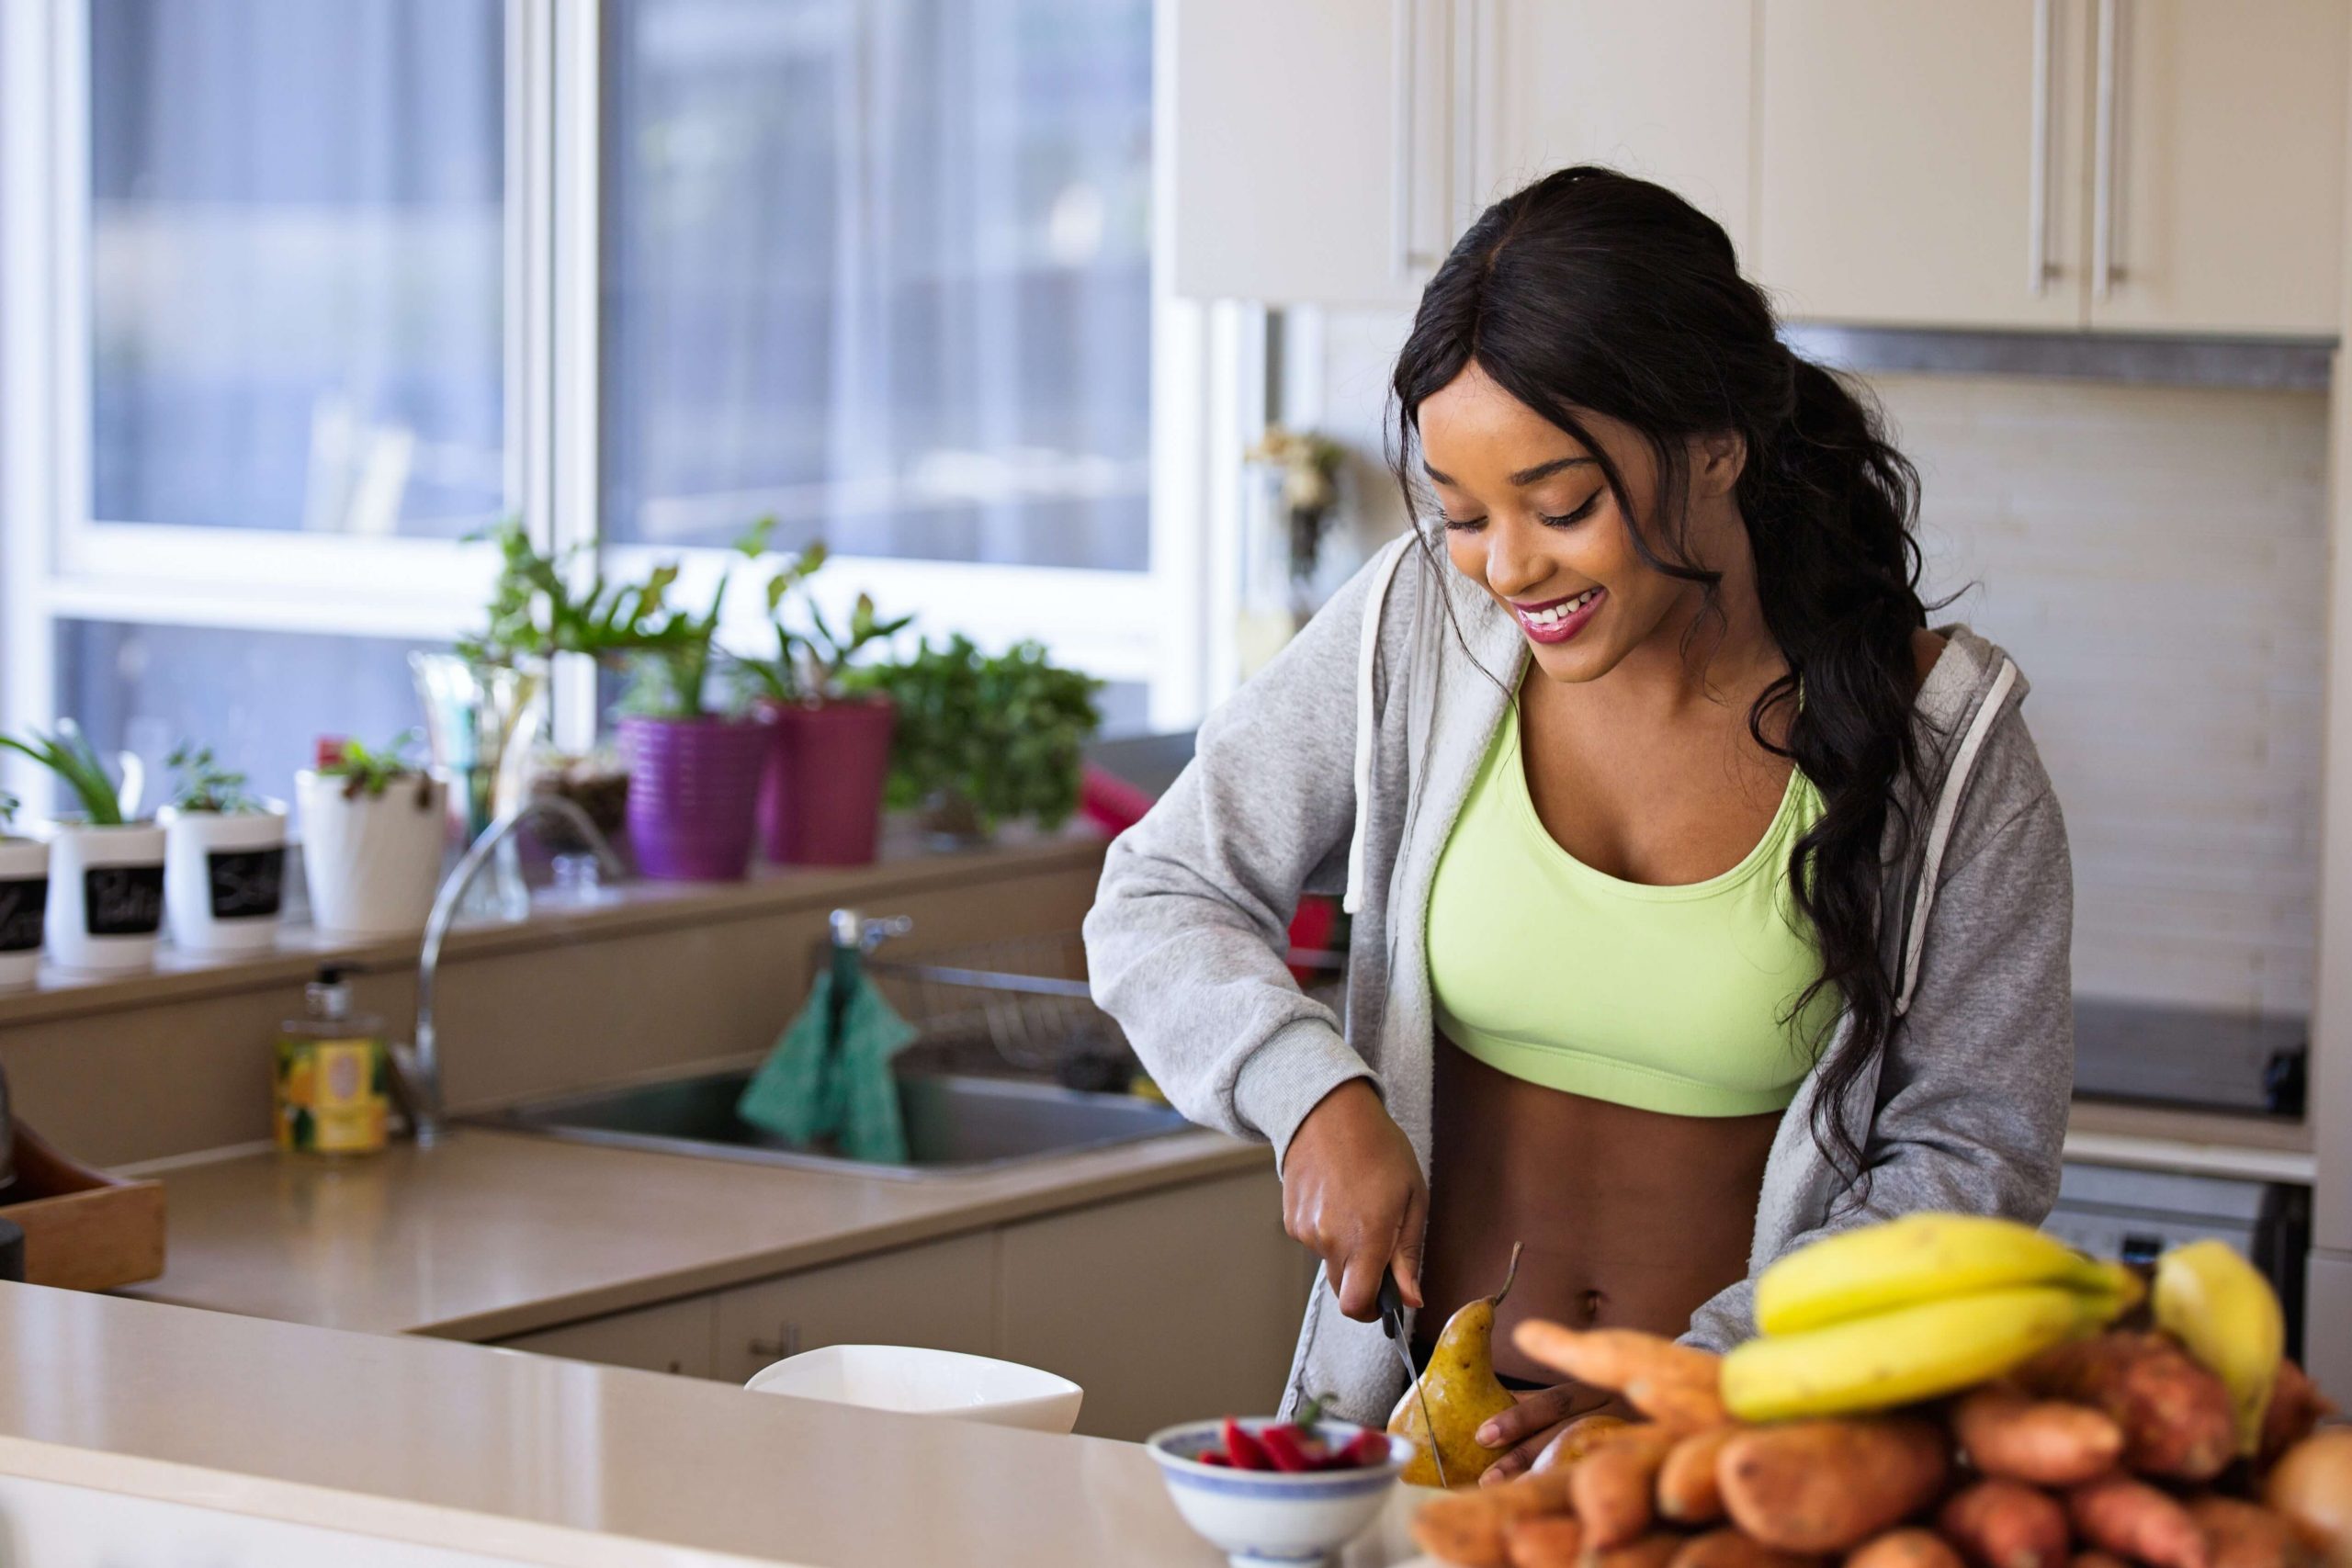 4 Ways to Eat Healthy on a Budget